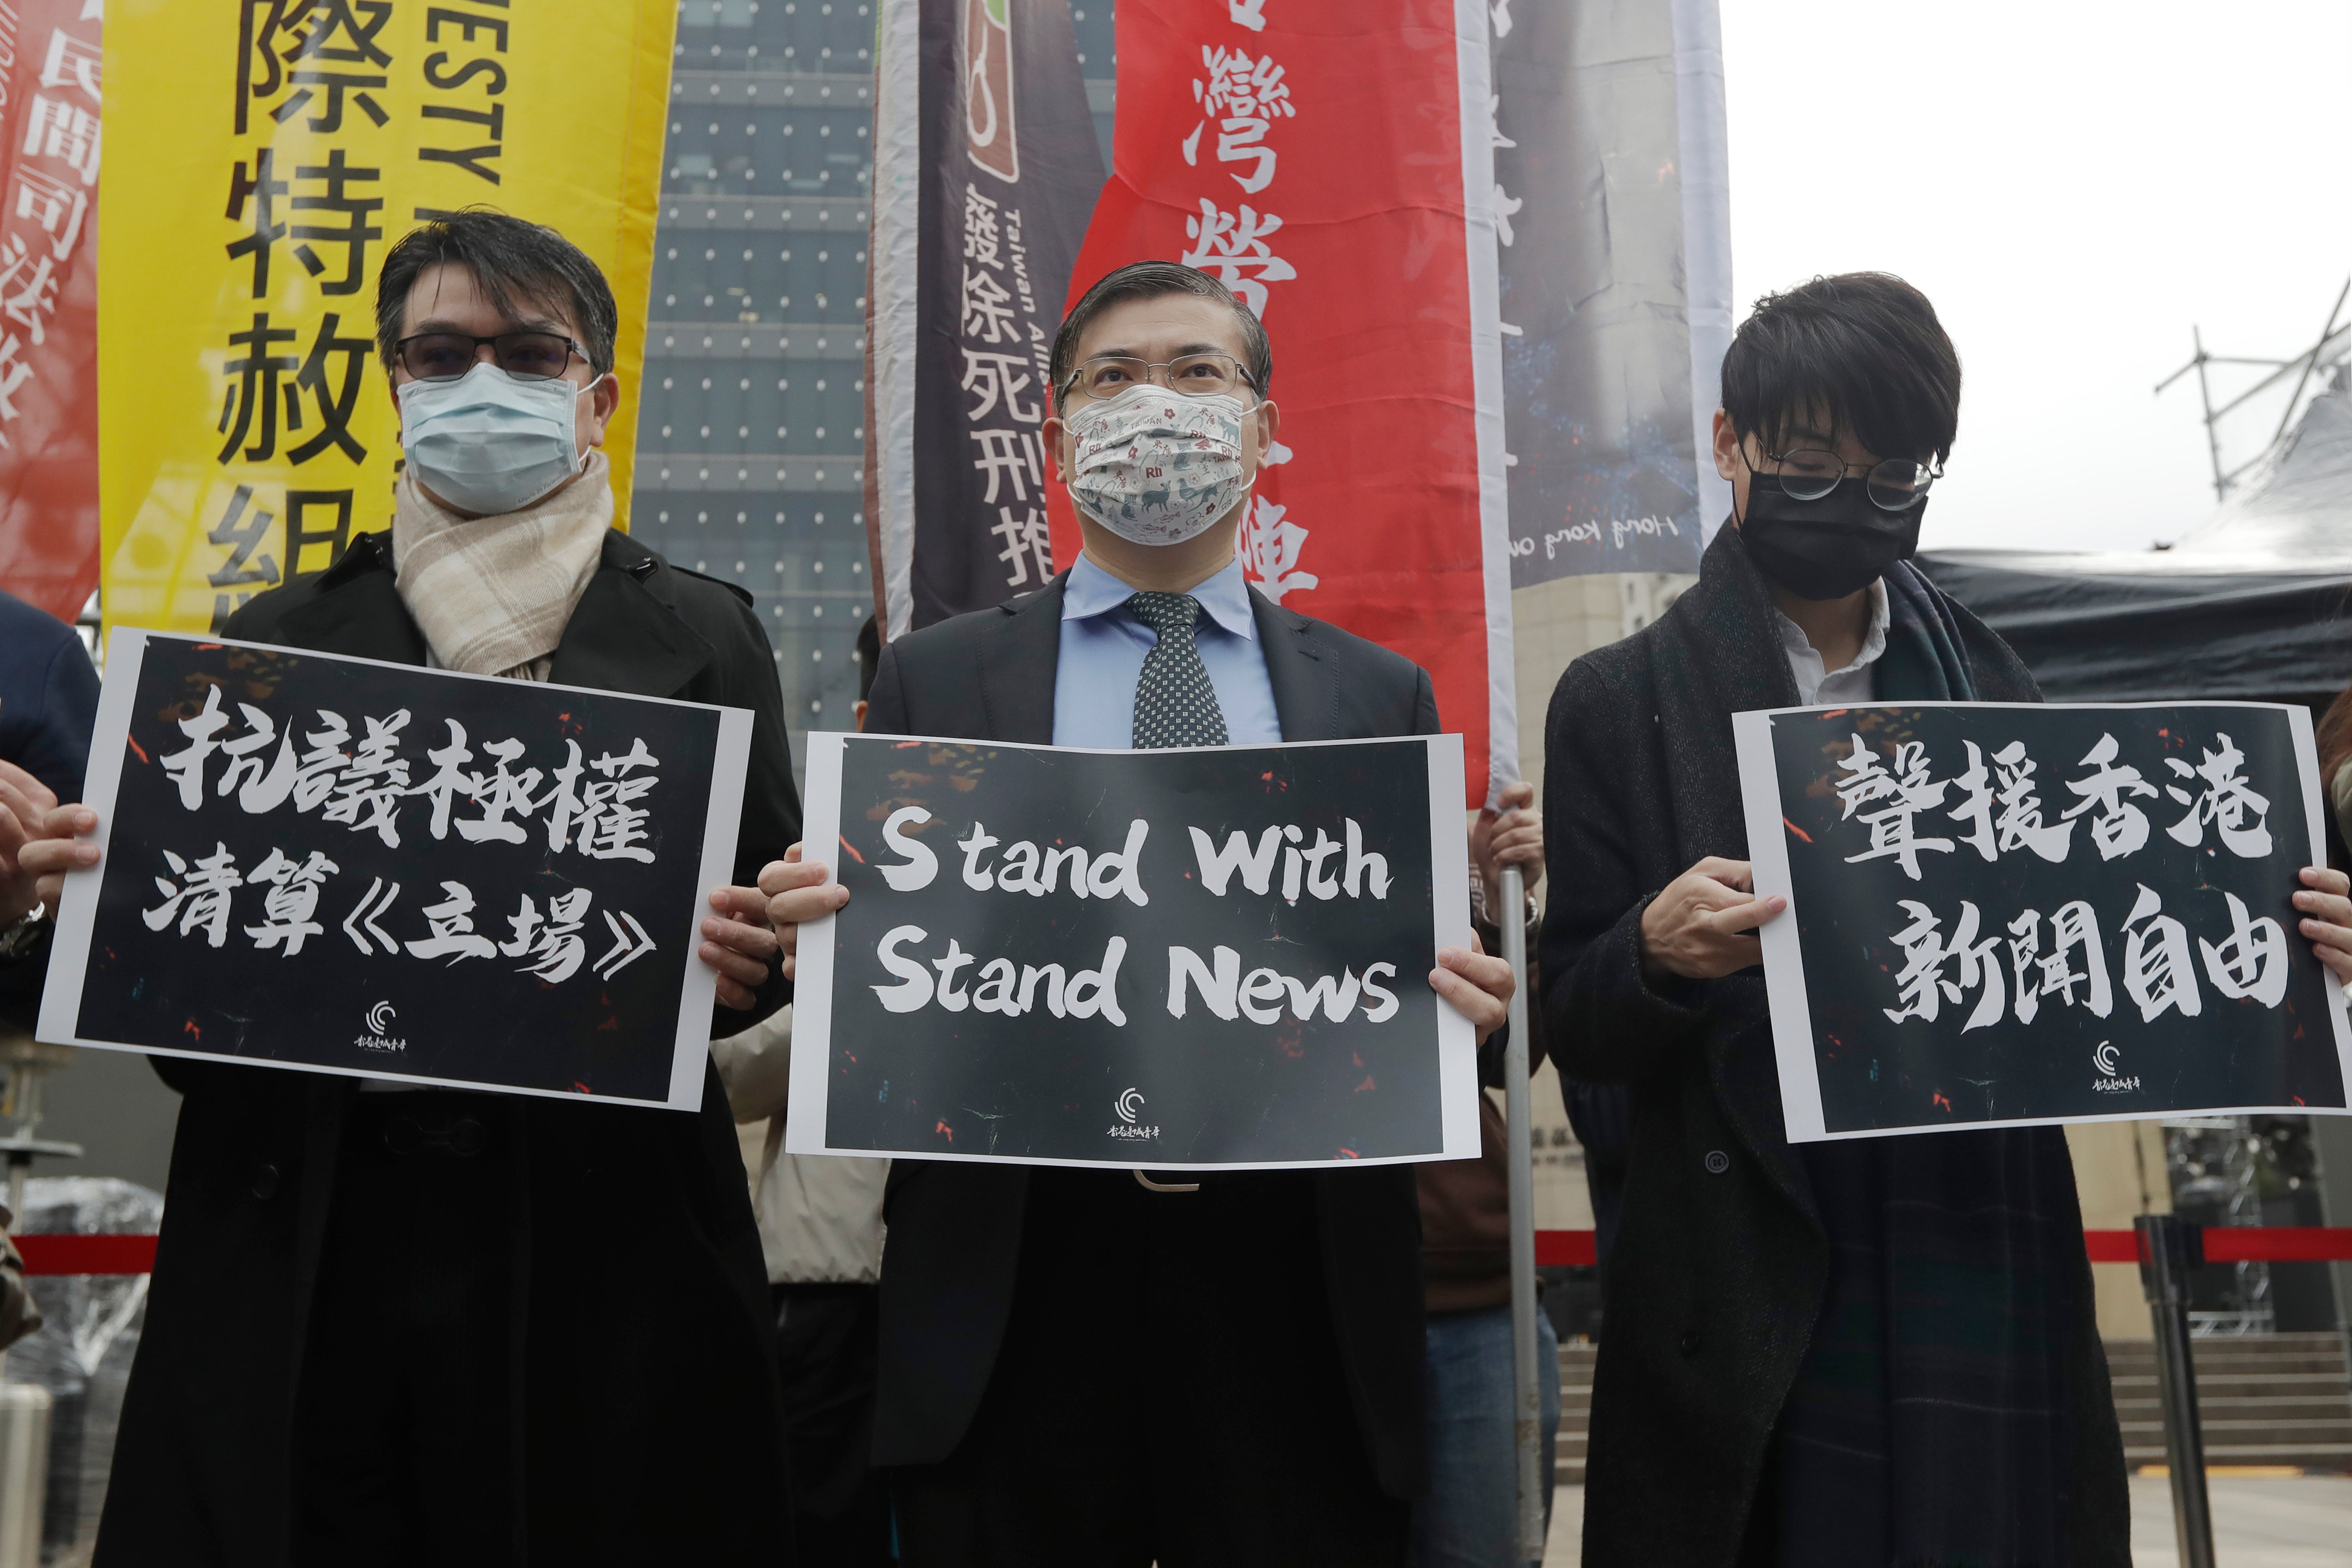 Protesters from Hong Kong in Taiwan and local supporters hold slogans reading ‘Protest Against Totalitarian Liquidation of Stand News’ and ‘Support Press Freedom in Hong Kong’